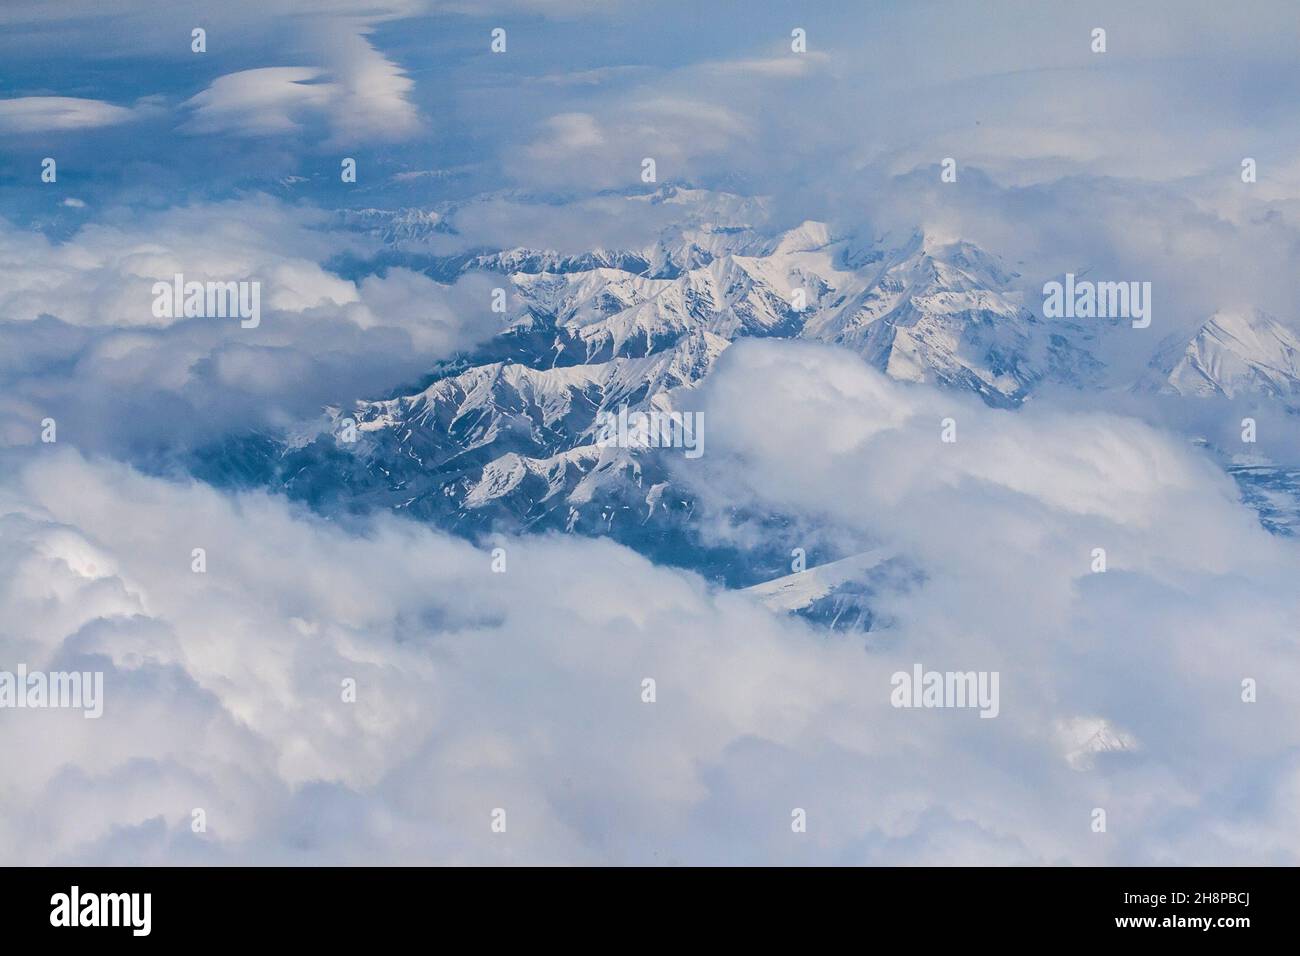 Aerial view of the majestic Denali mountain range with white cloud coverage. Stock Photo